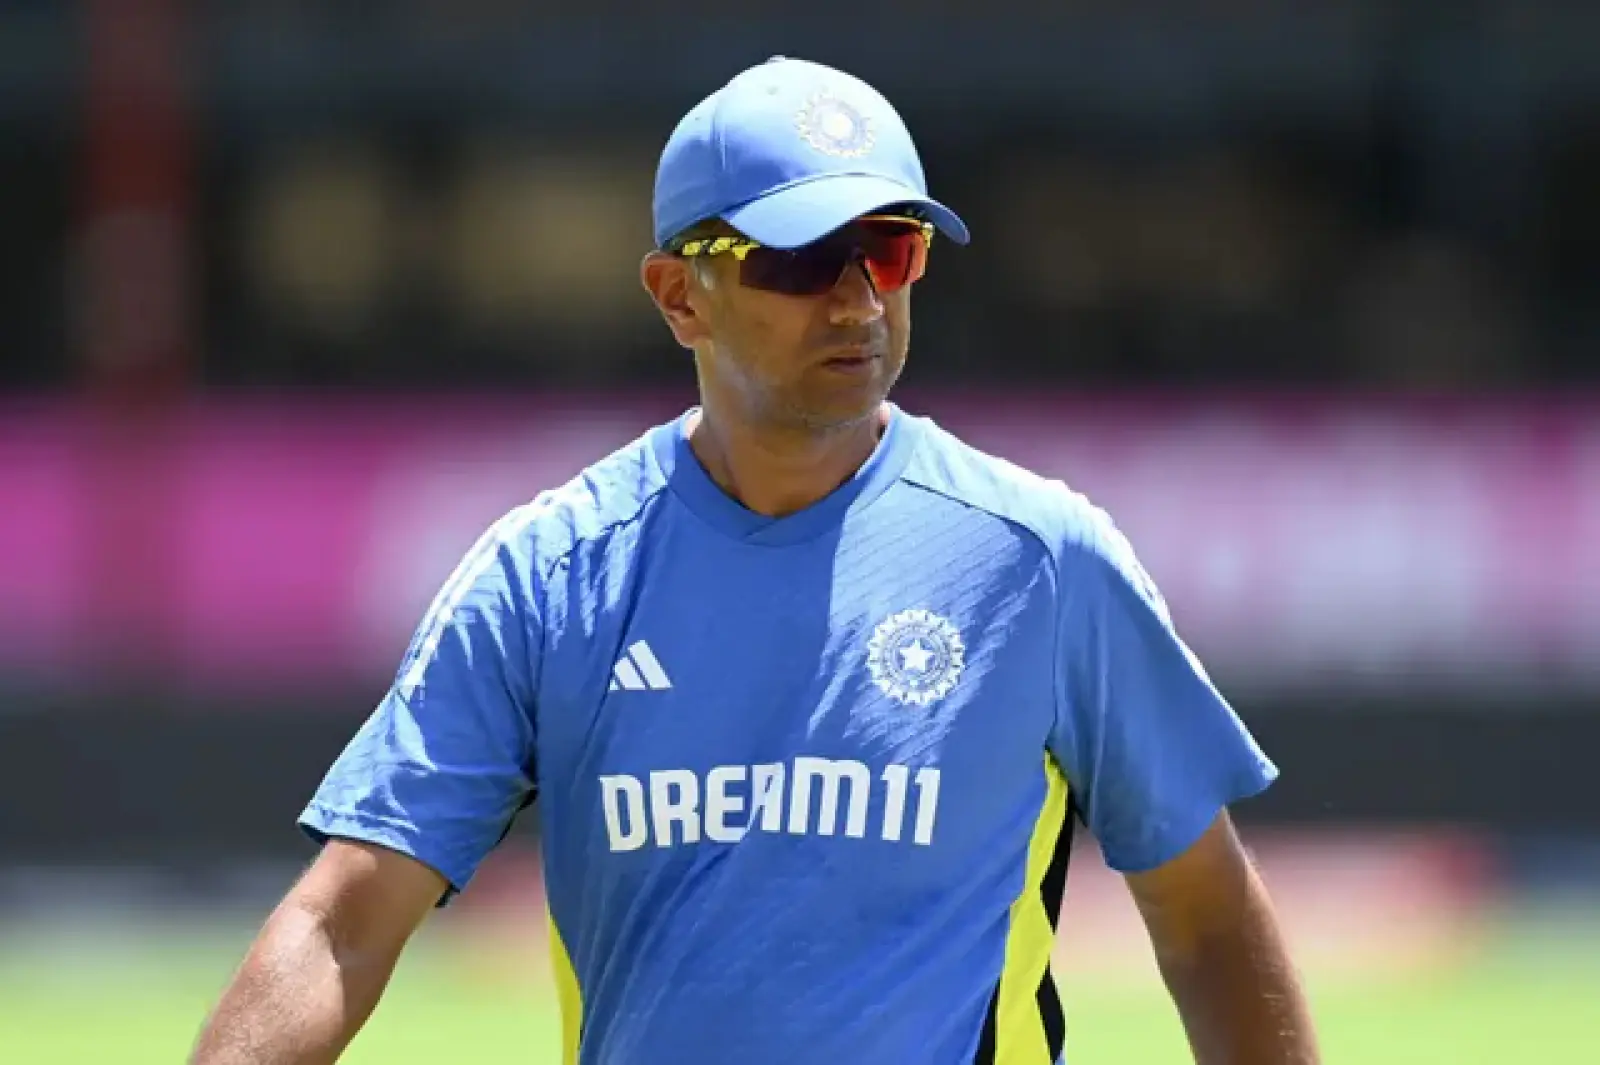 Rahul Dravid's big prediction about IND vs SA Final, said - a big score is going to come from this player's bat